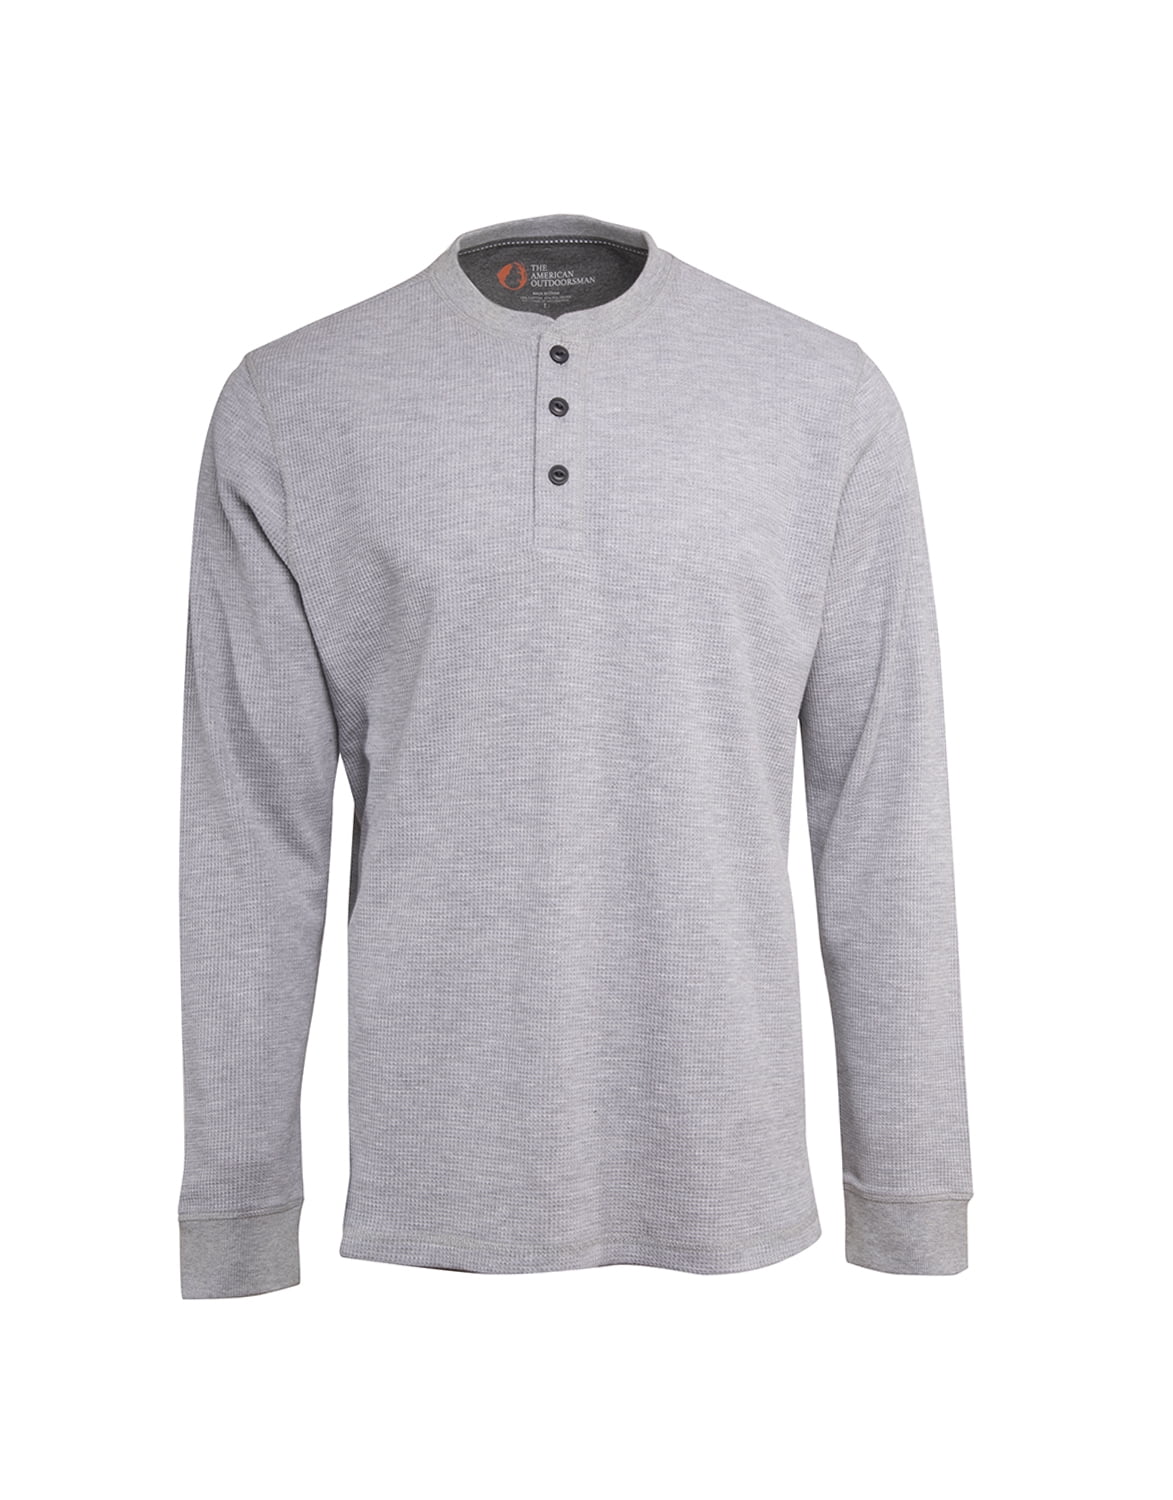 The American Outdoorsman Long-Sleeve Waffle Henley Shirts For Men ...